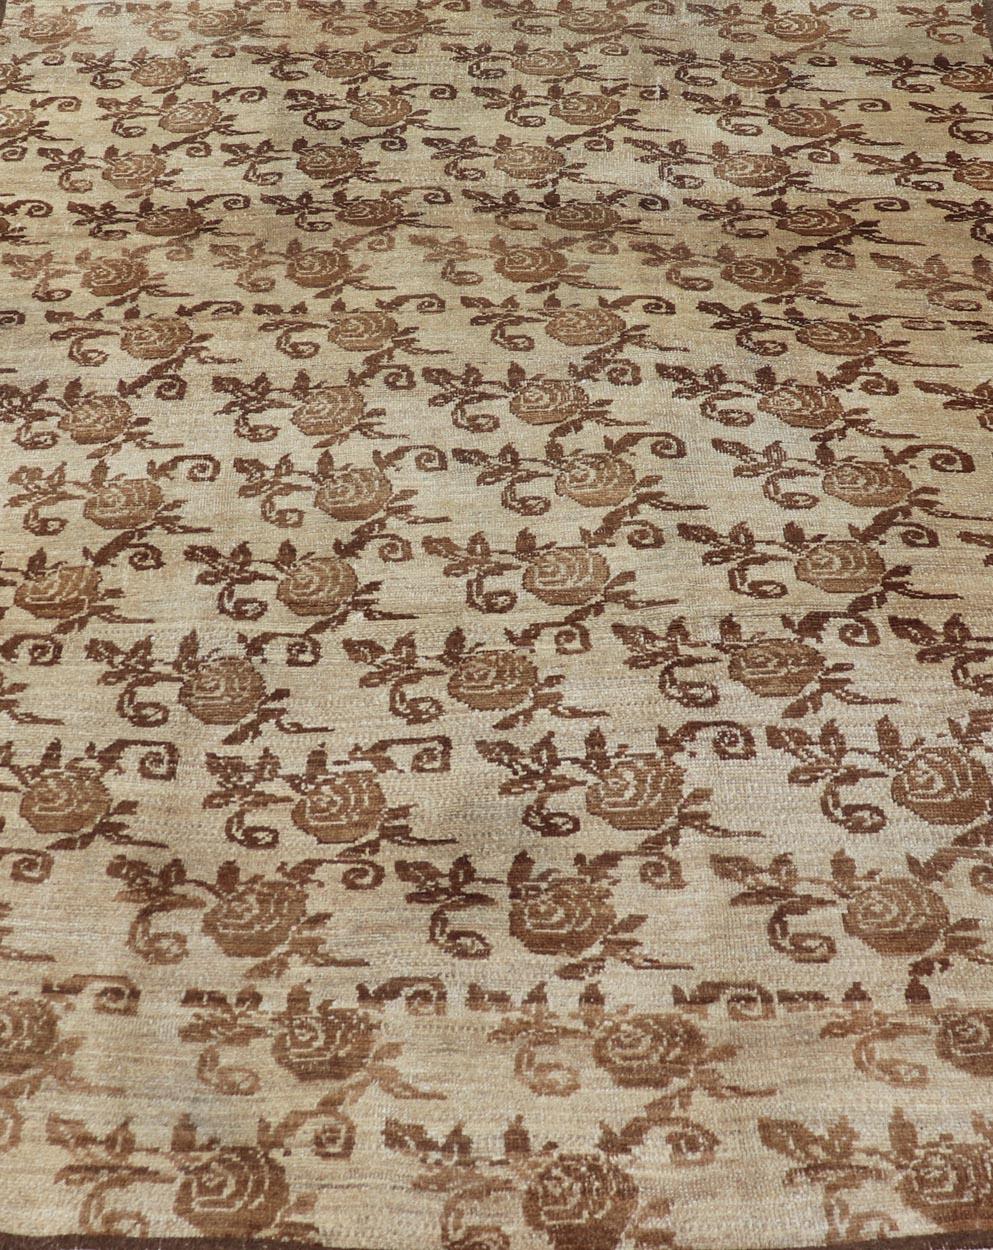 A Unique antique Turkish Konya rug with all-over floral pattern in taupe and brown
This delightful antique Turkish Konya carpet features an all-over repeating floral pattern in a variety of taupe and brown tones.
Measures: 9.2 x 6.5.